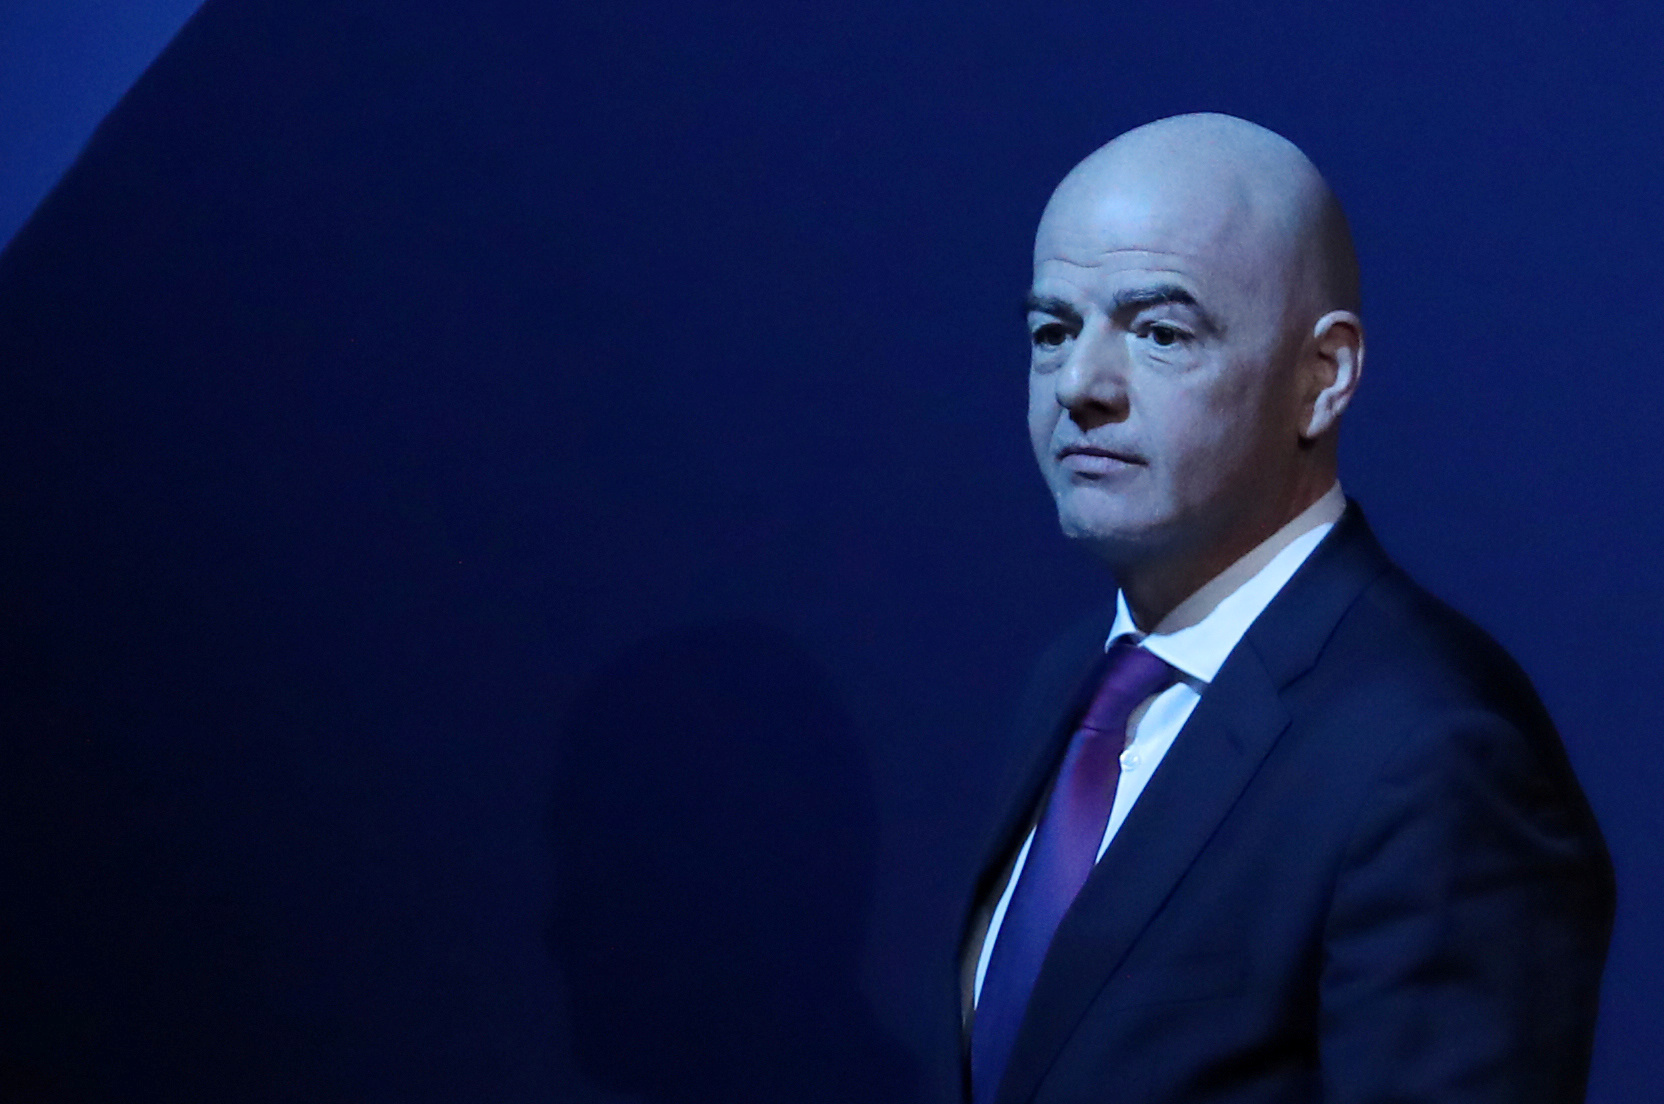 Gianni Infantino made ridiculous remarks at the PACE and tried to gain votes for his unviable project for world cups every two years offering money to the federations. (REUTERS/Yves Herman)